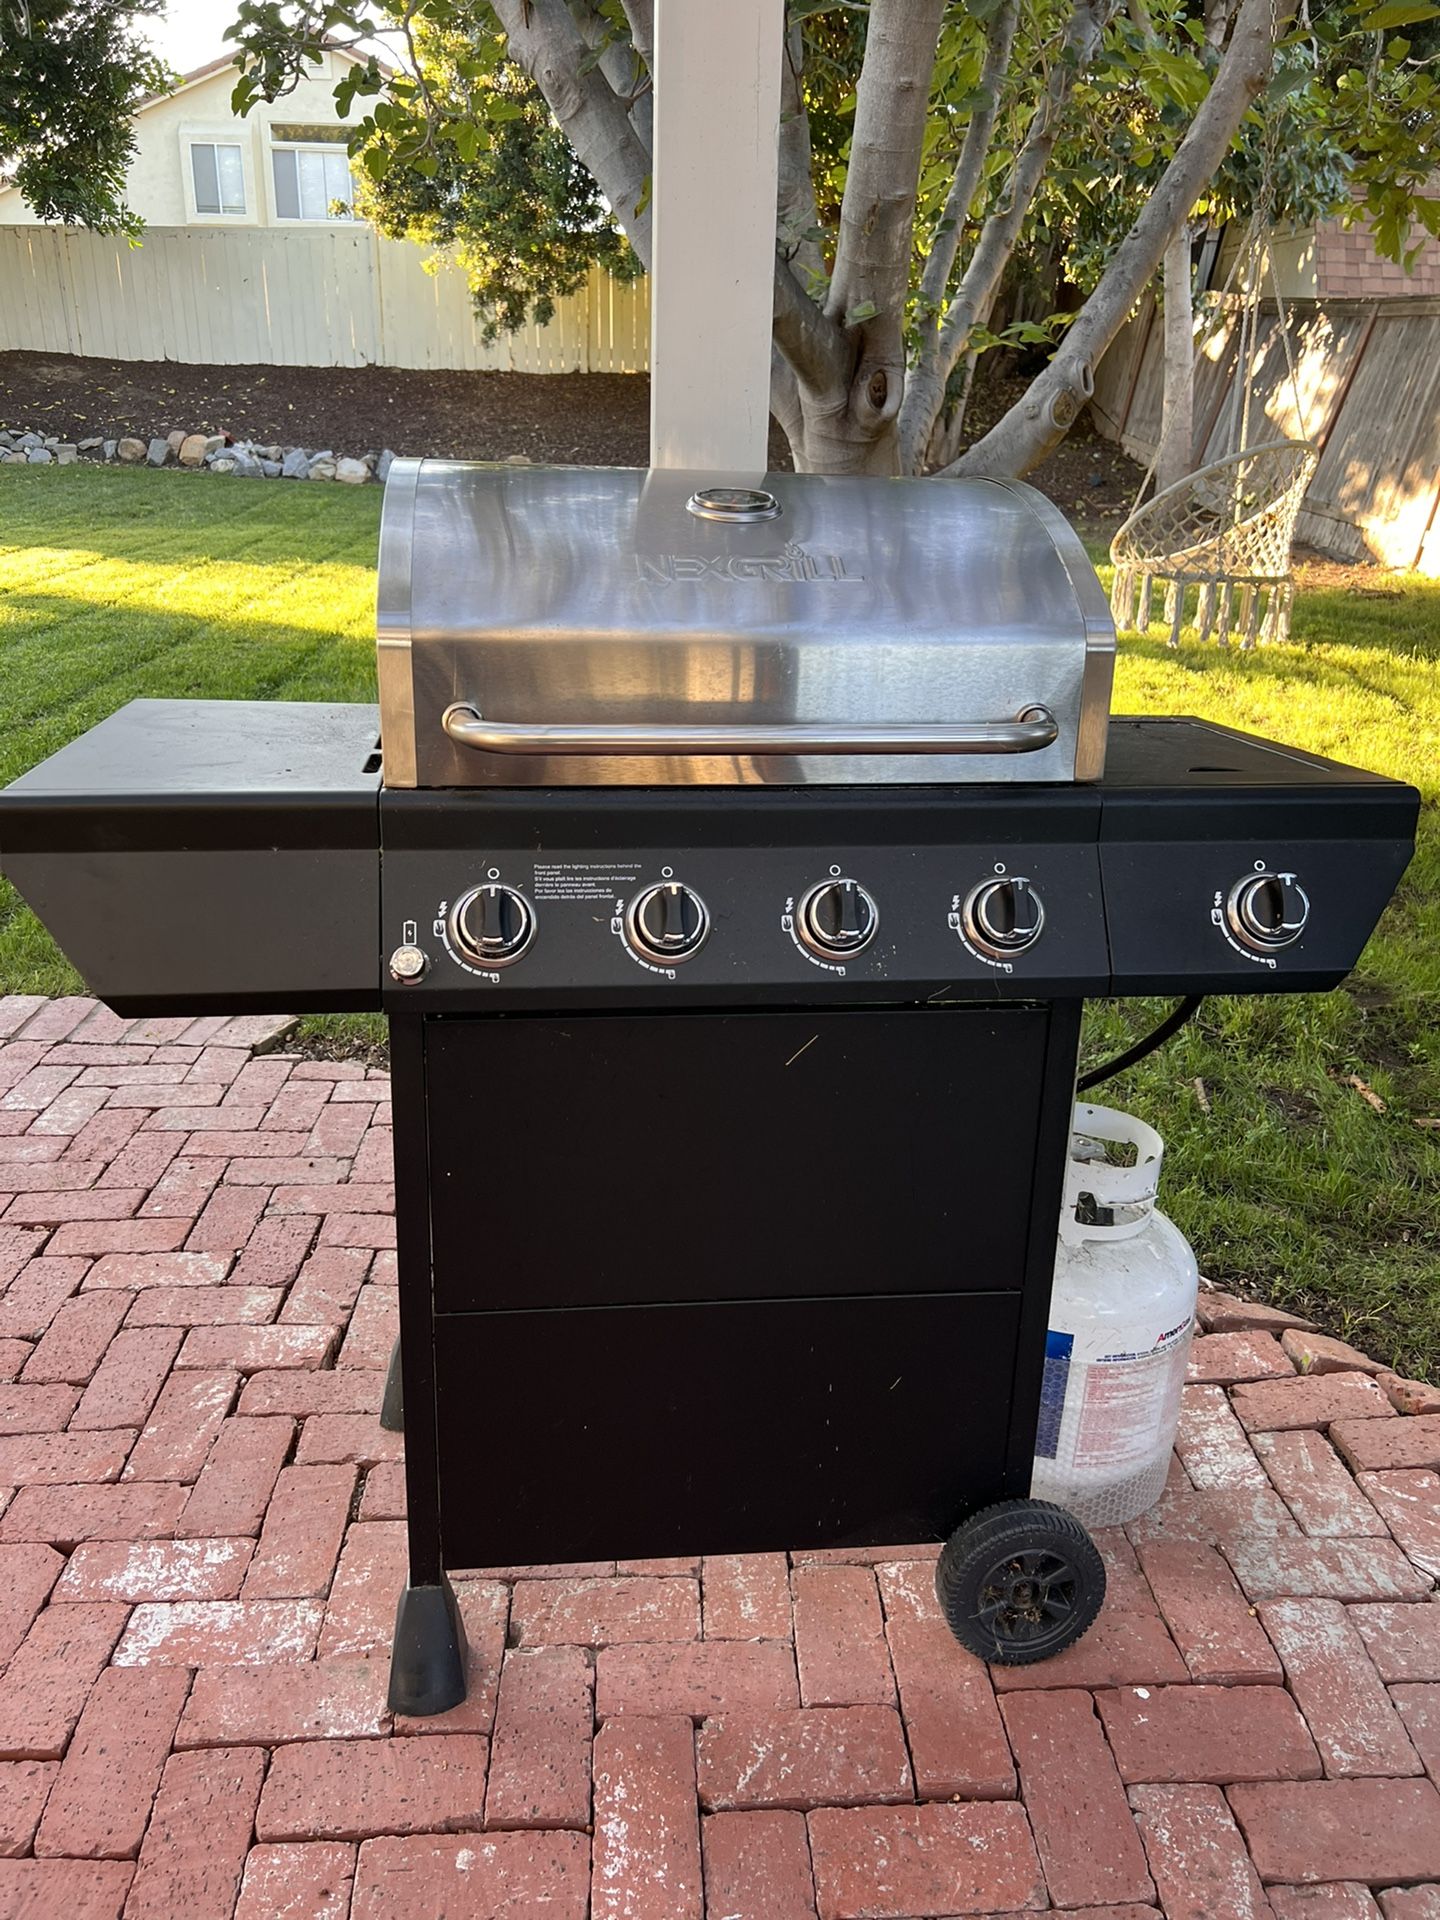 BBQ Grill With Cover 